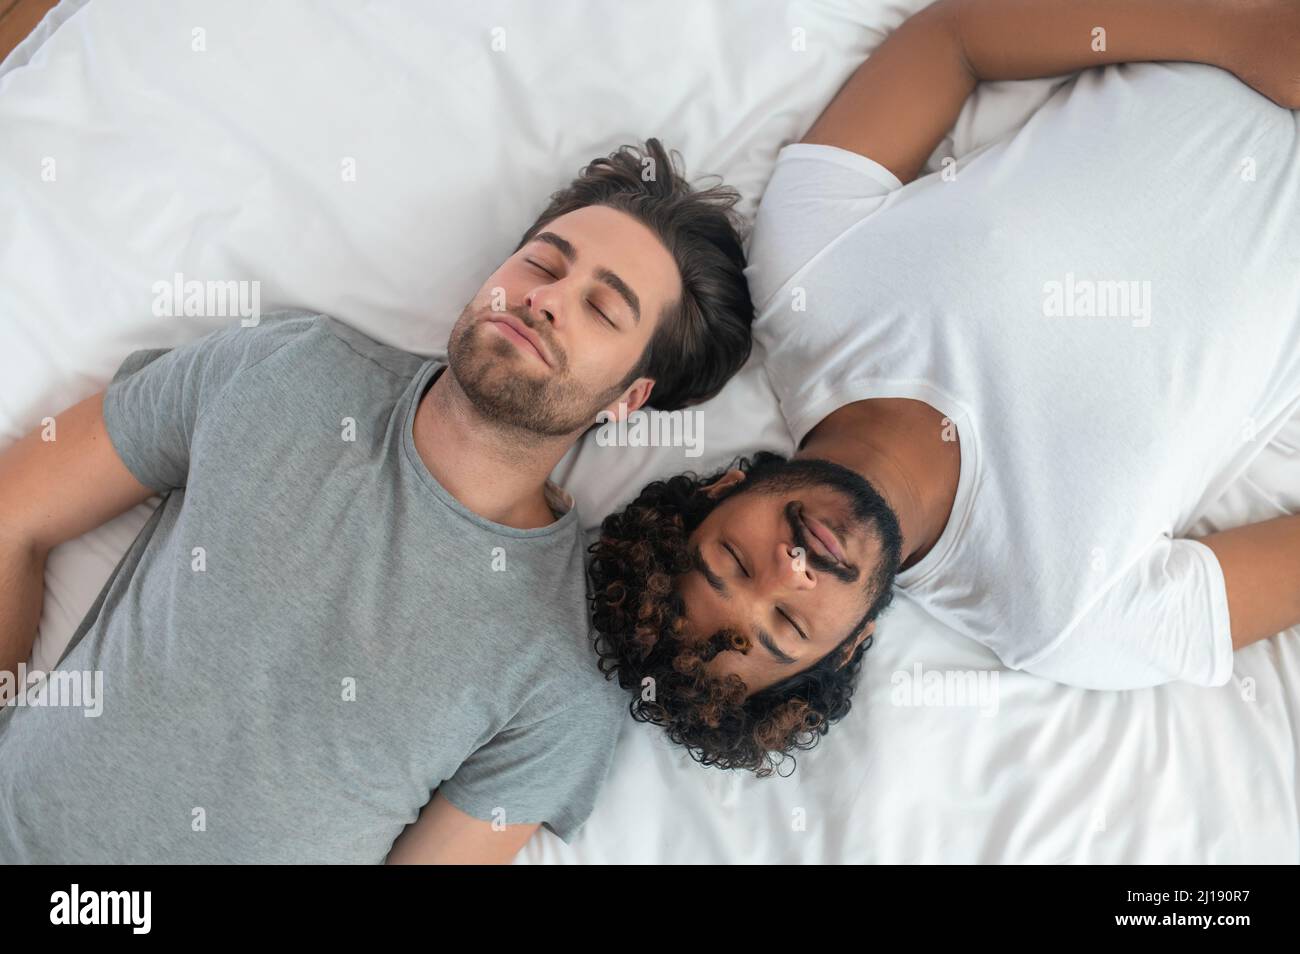 Two young men sleeping on their backs in bed Stock Photo